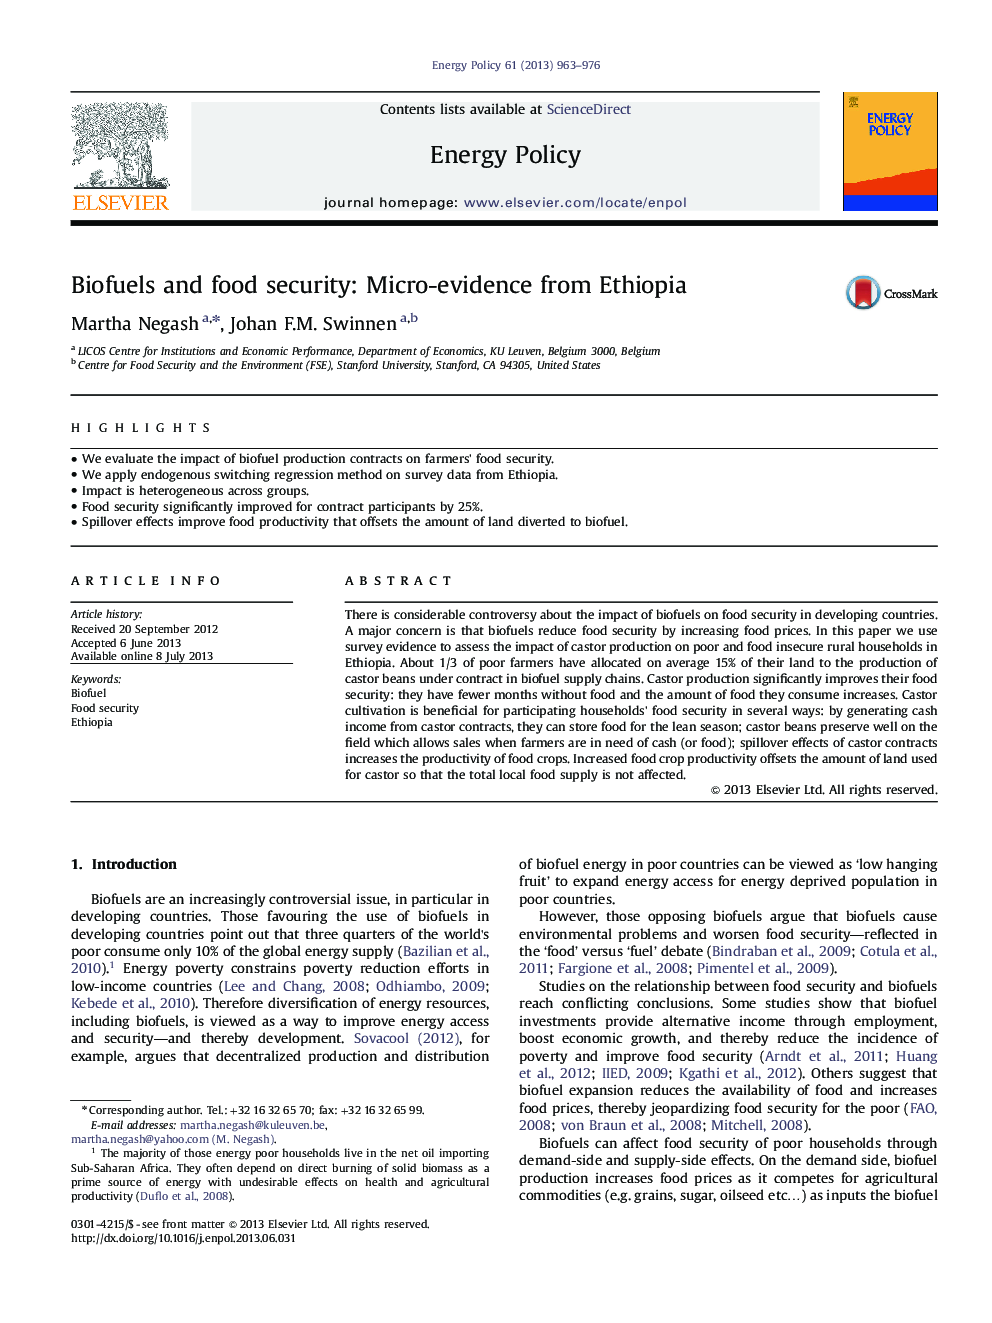 Biofuels and food security: Micro-evidence from Ethiopia